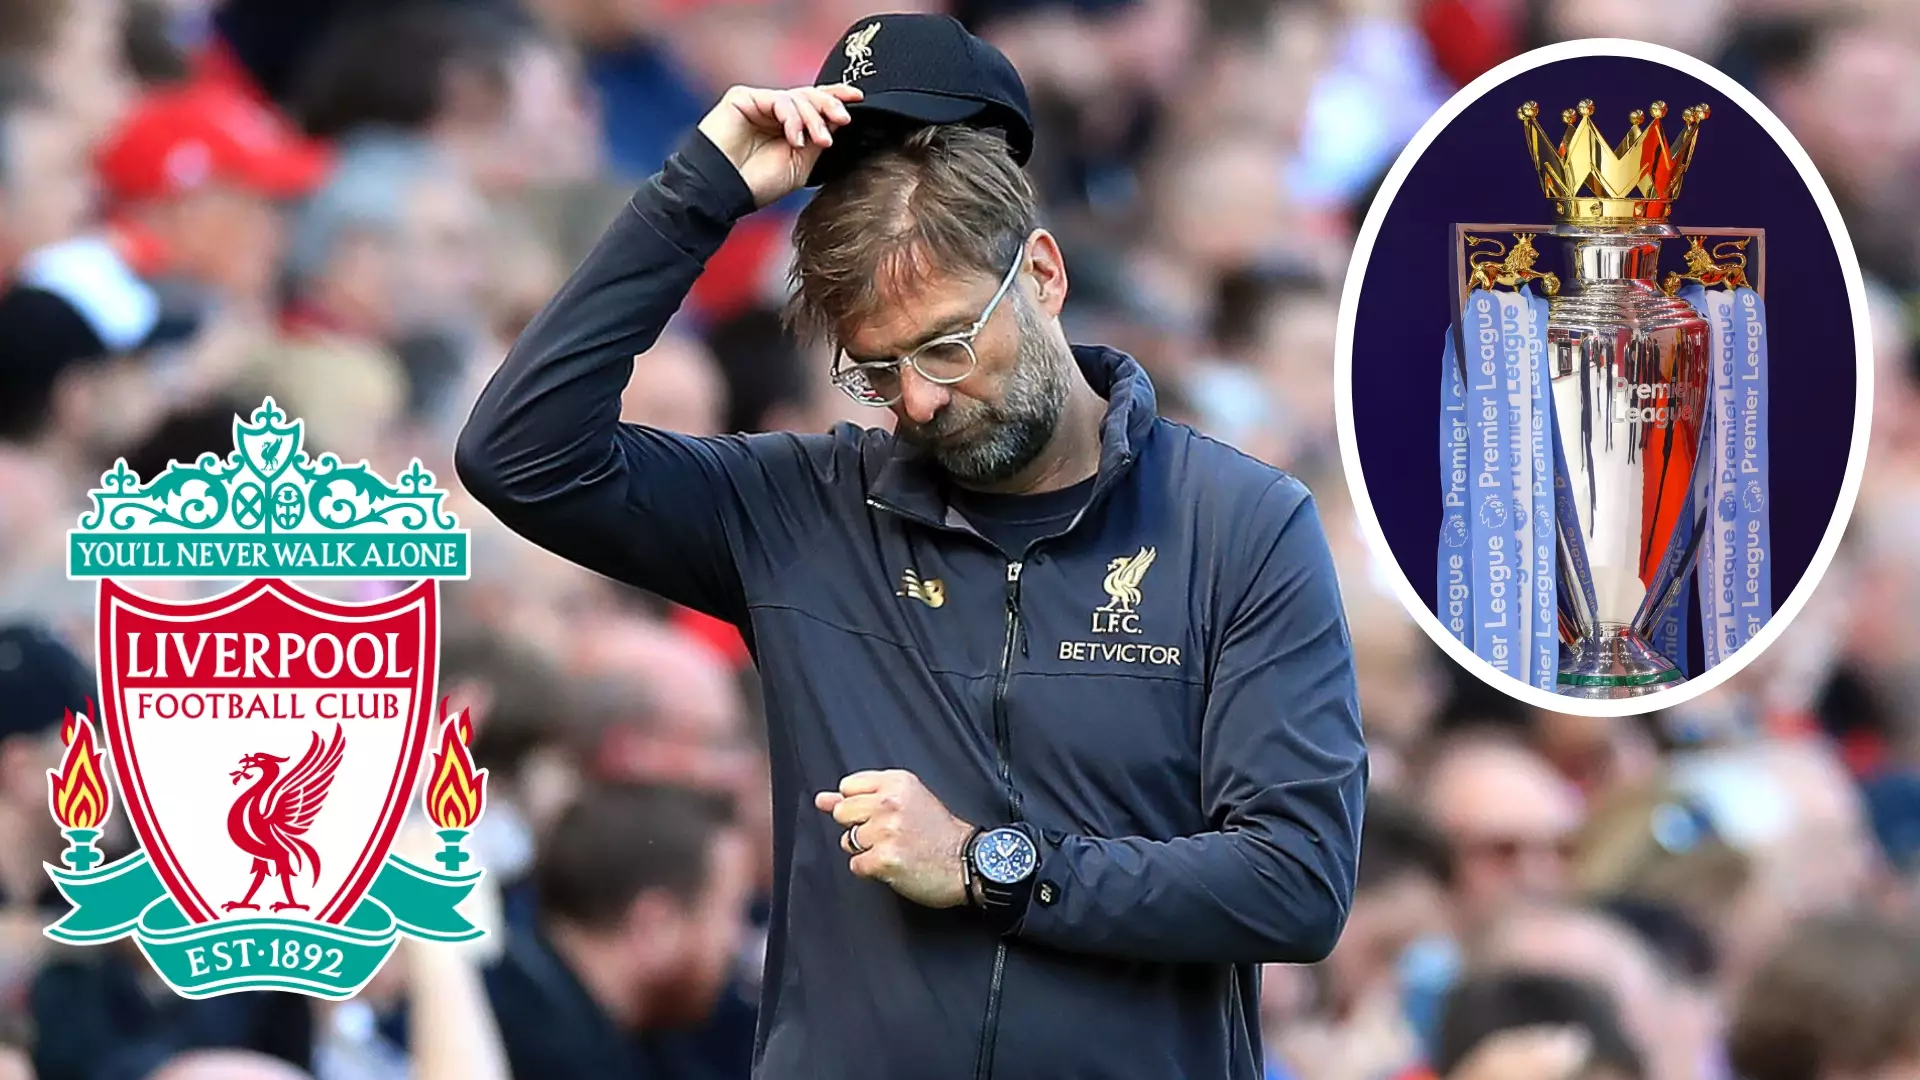 Liverpool Failed To Win The Premier League Title After Being Top At Christmas Day